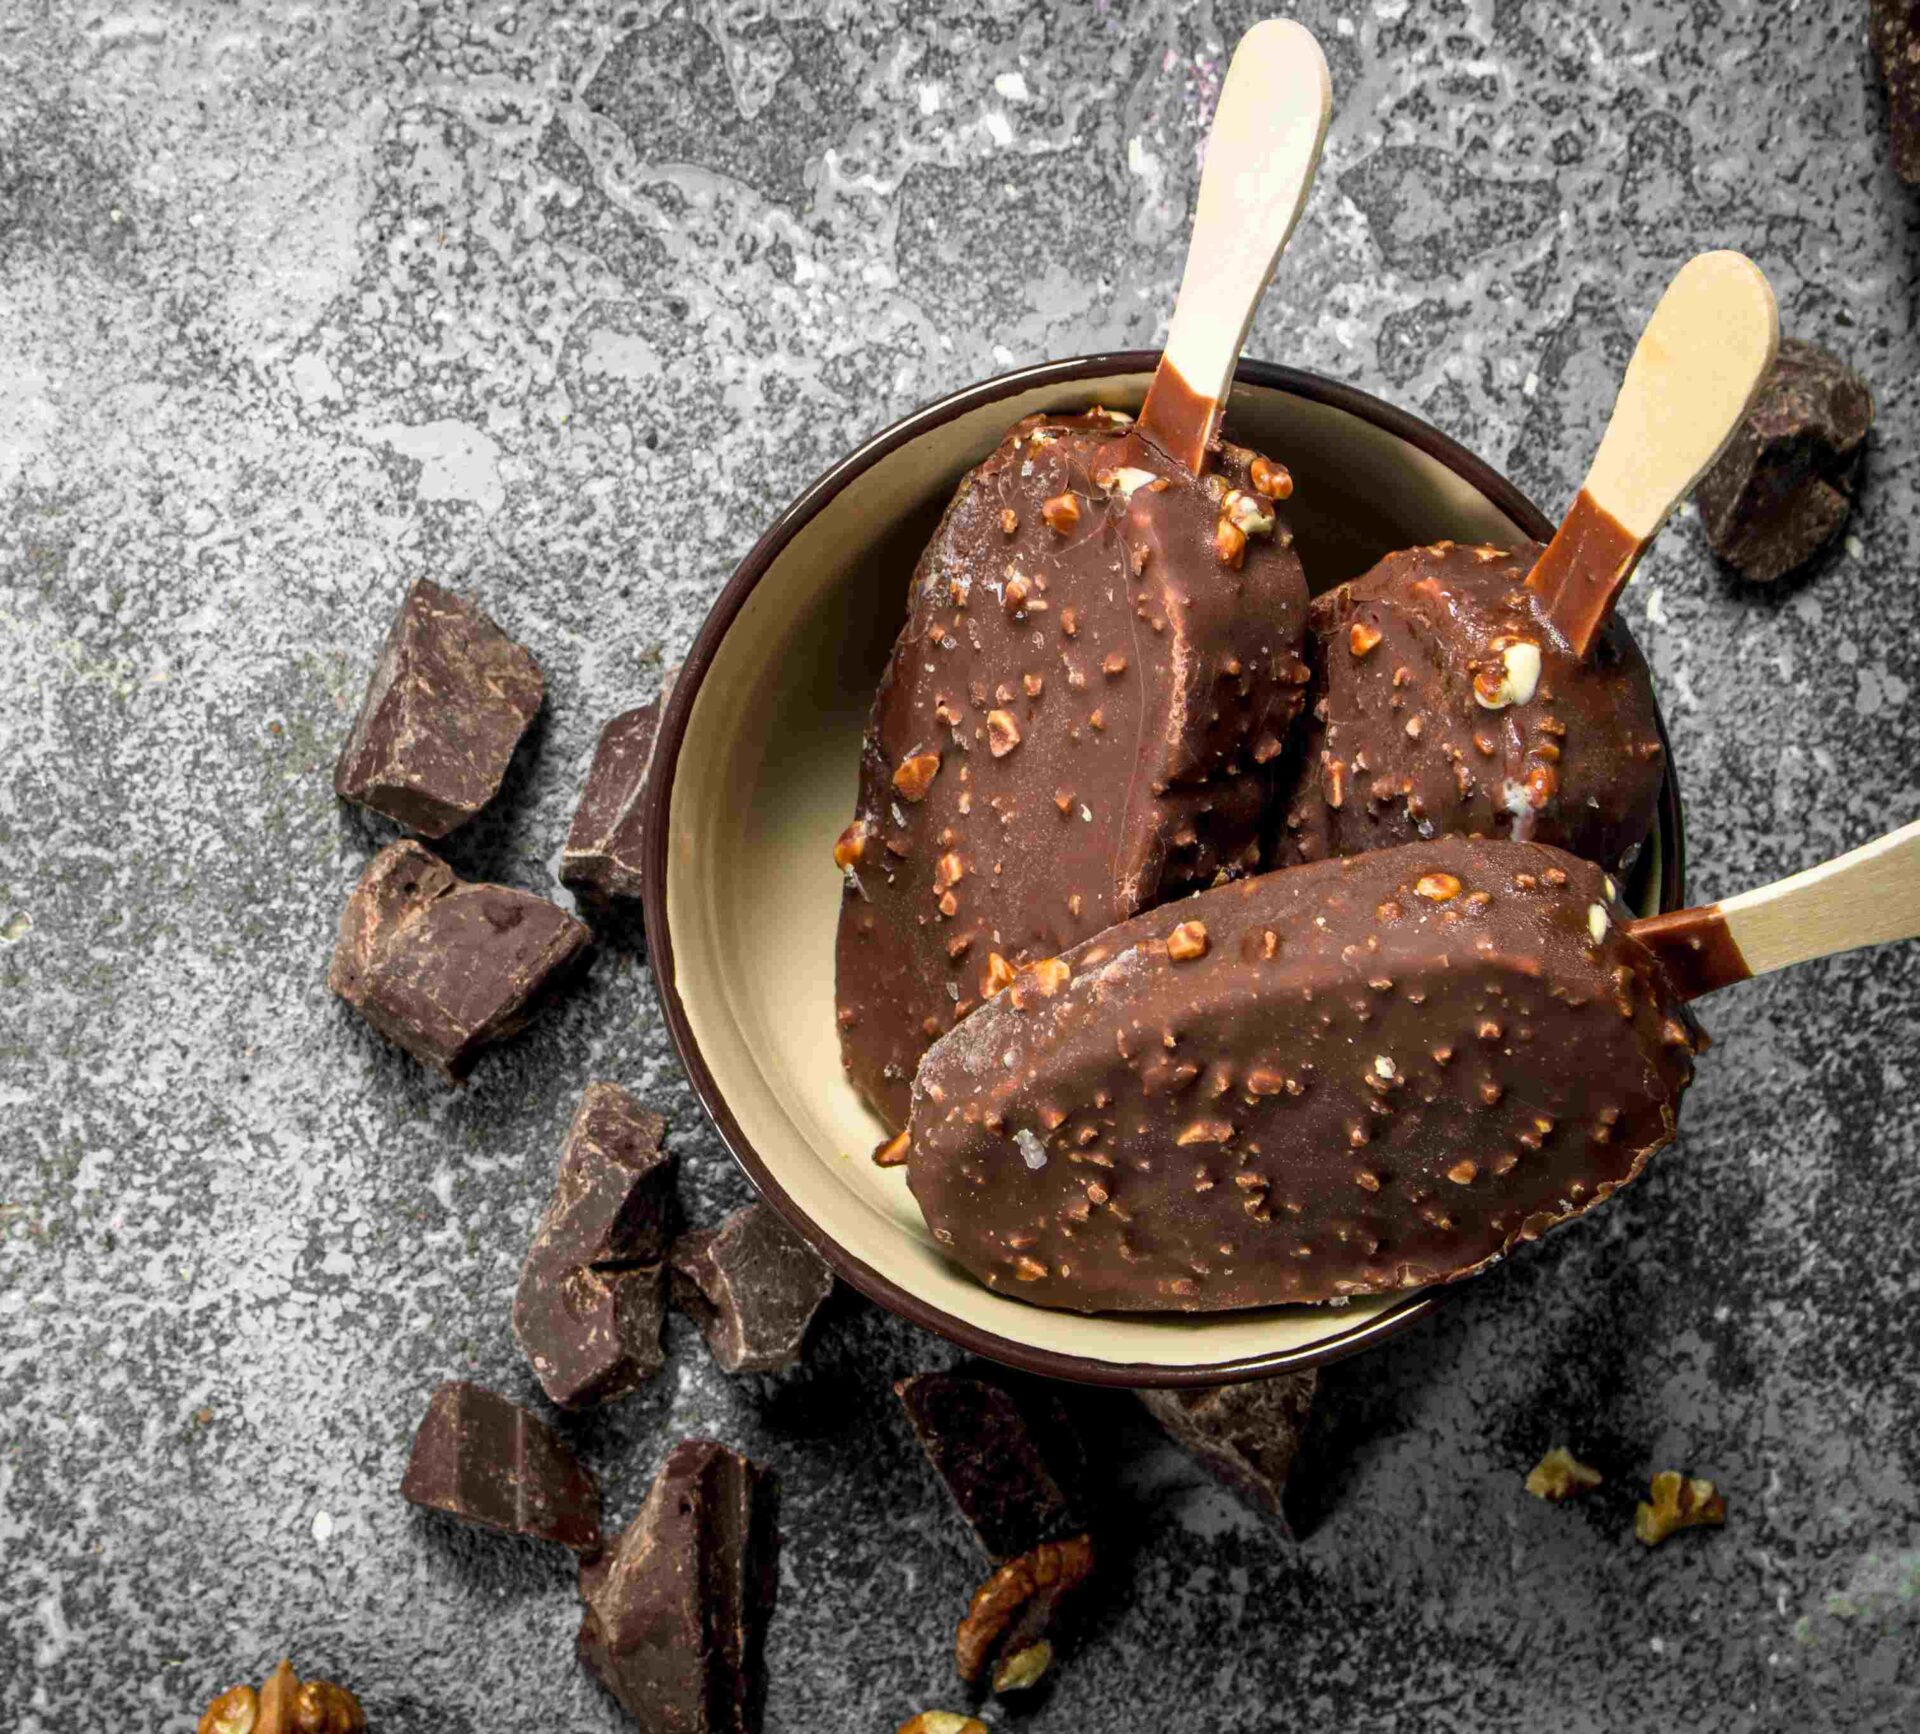 Bowl of Chocolate Covered Ice Cream Bars with Diced Almonds - Ice Cream Favorites